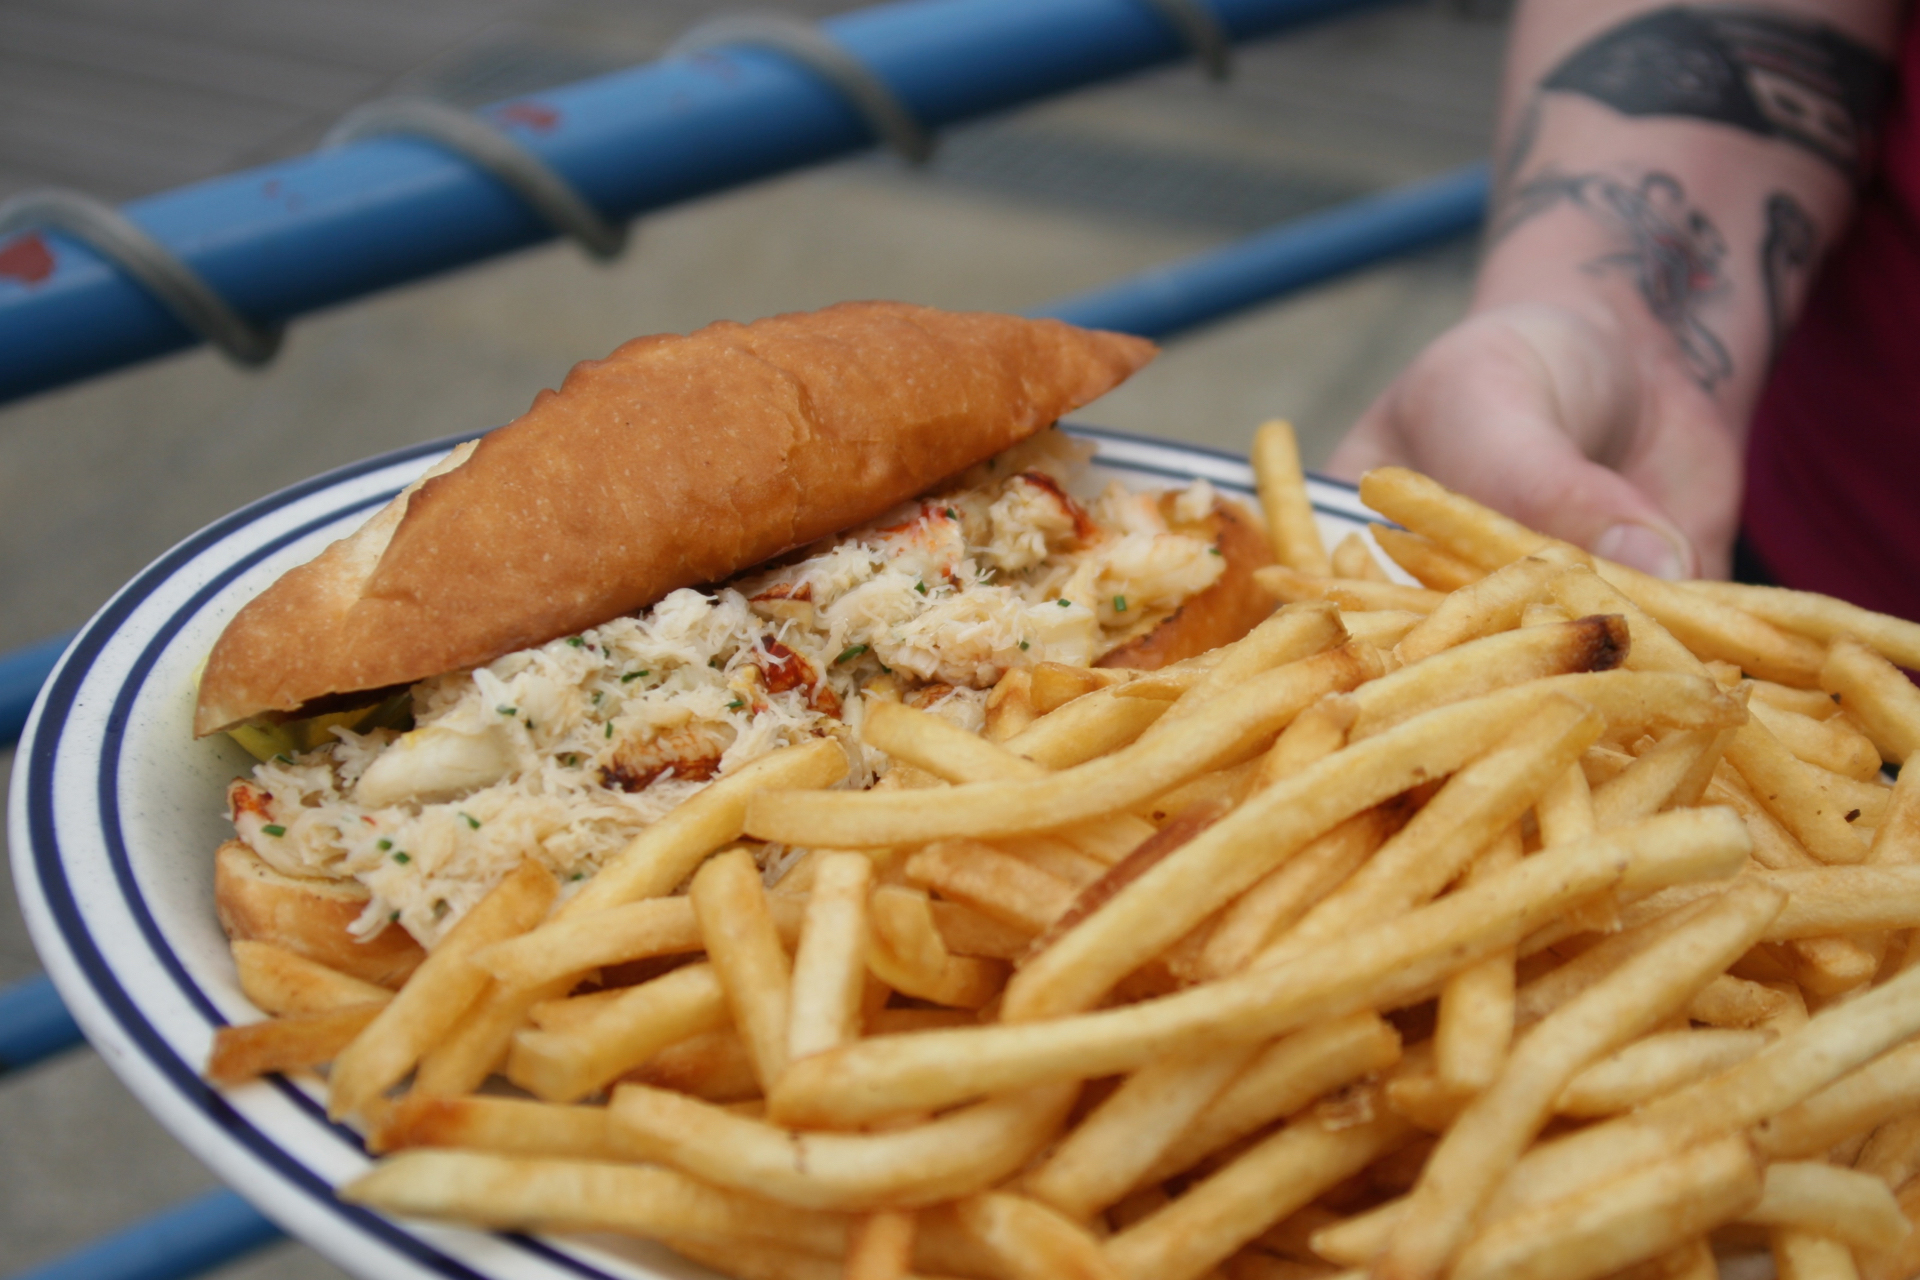 Crab roll made with Dungeness crab, when in season.